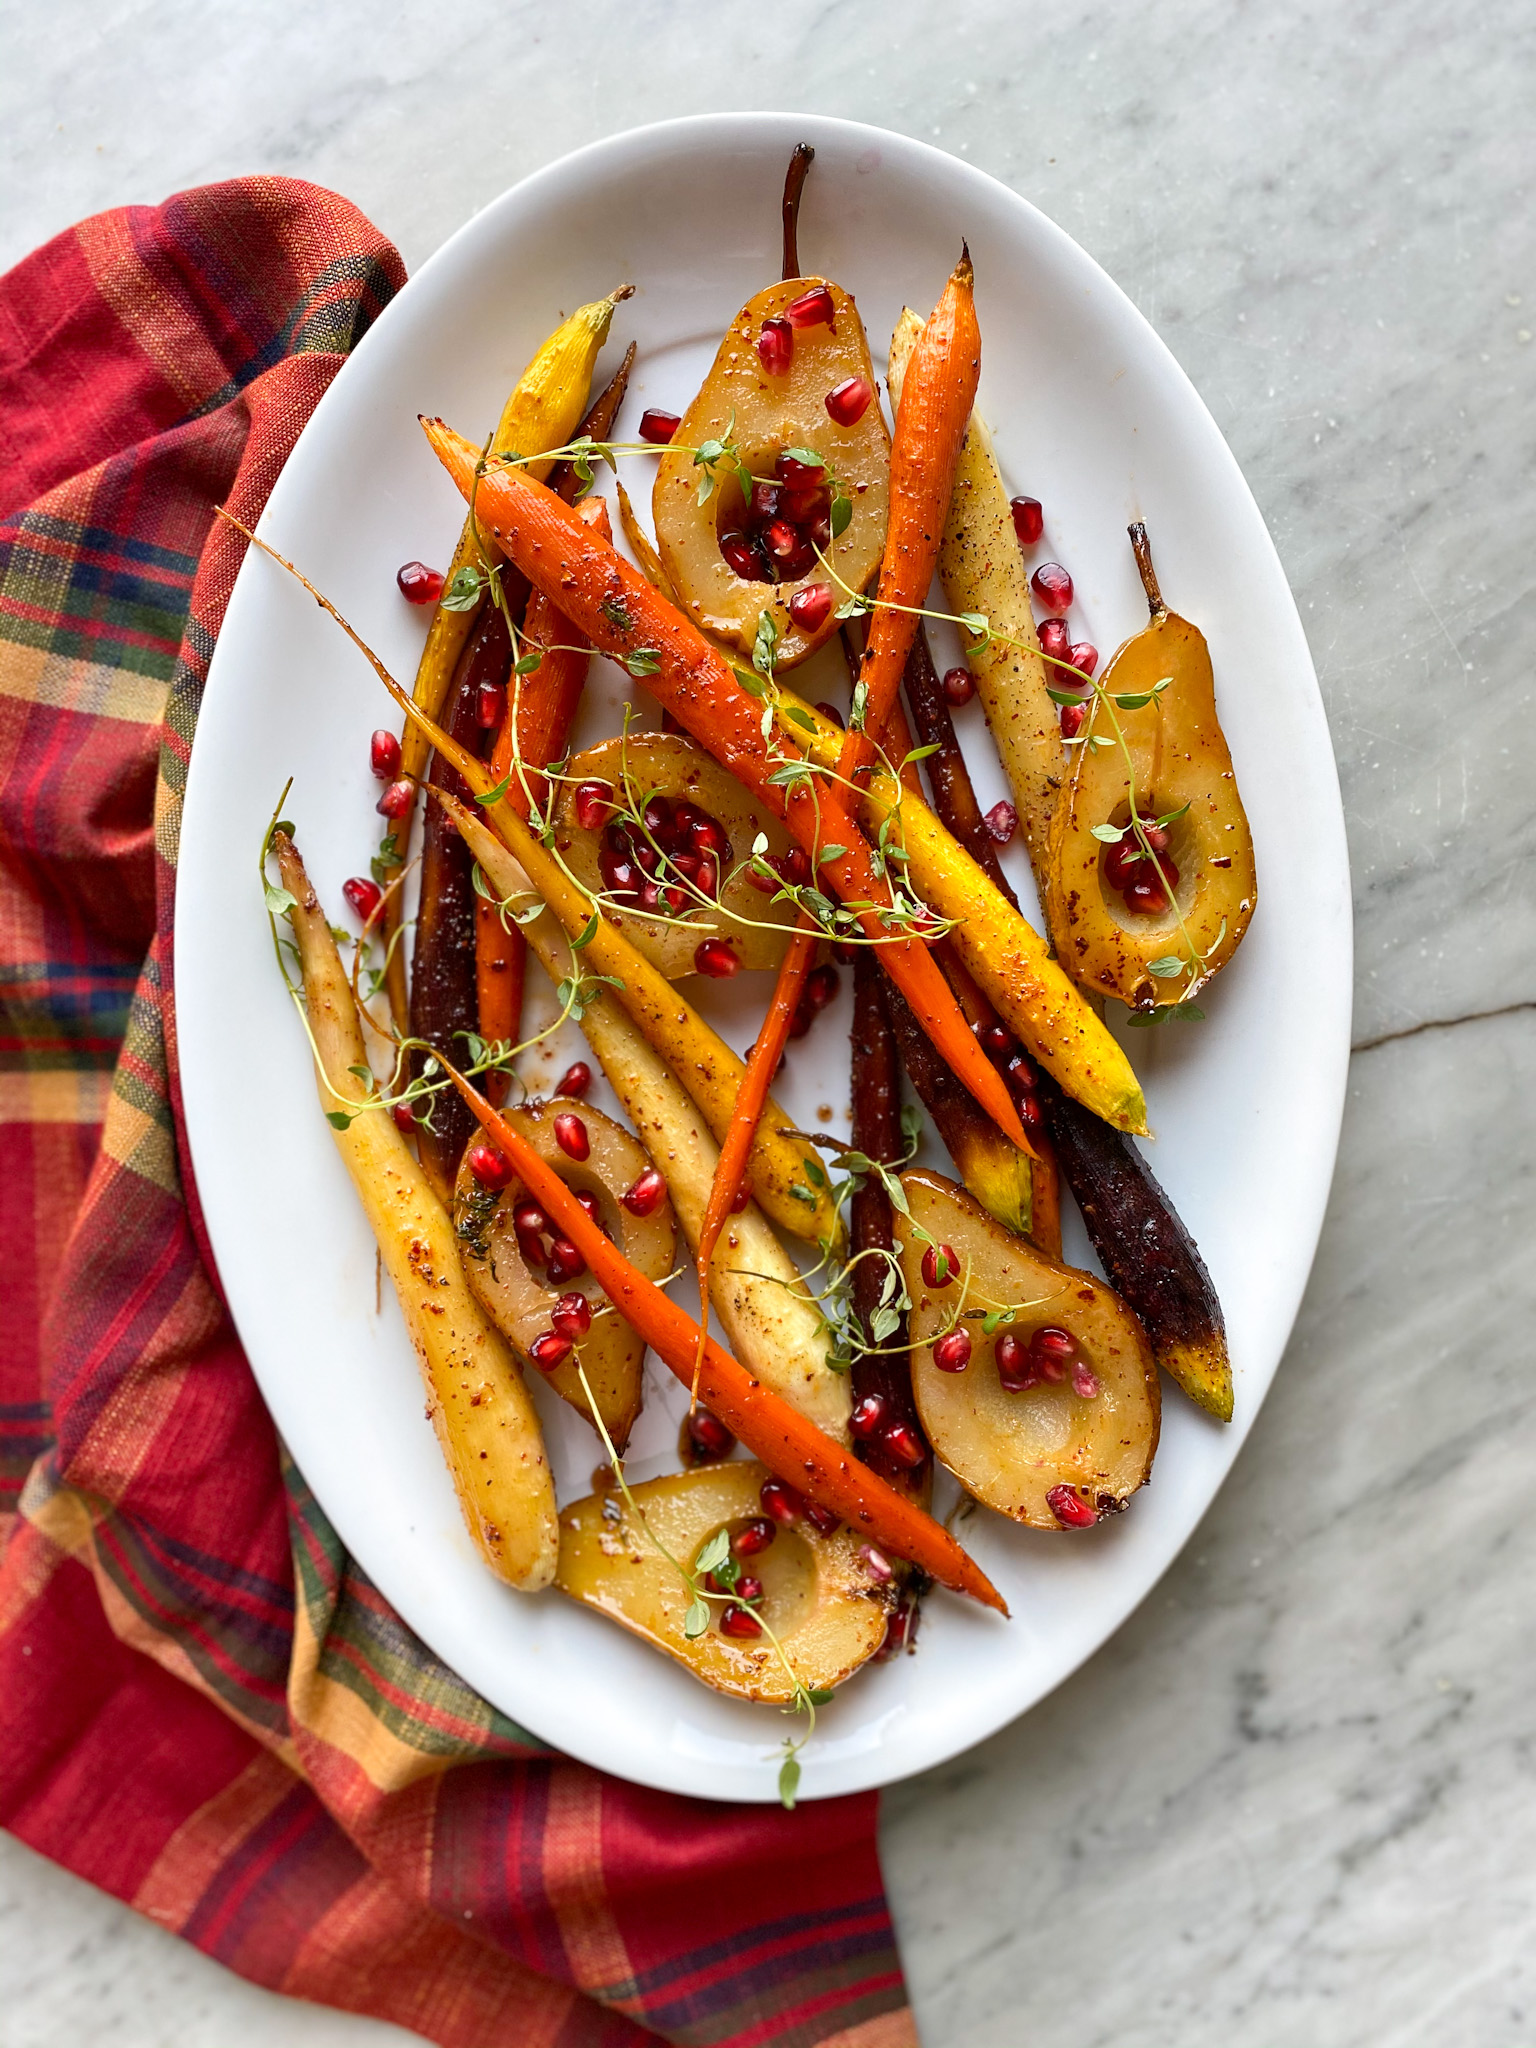 vegatable side dishes: carrots and pears on a platter with plaid napkin